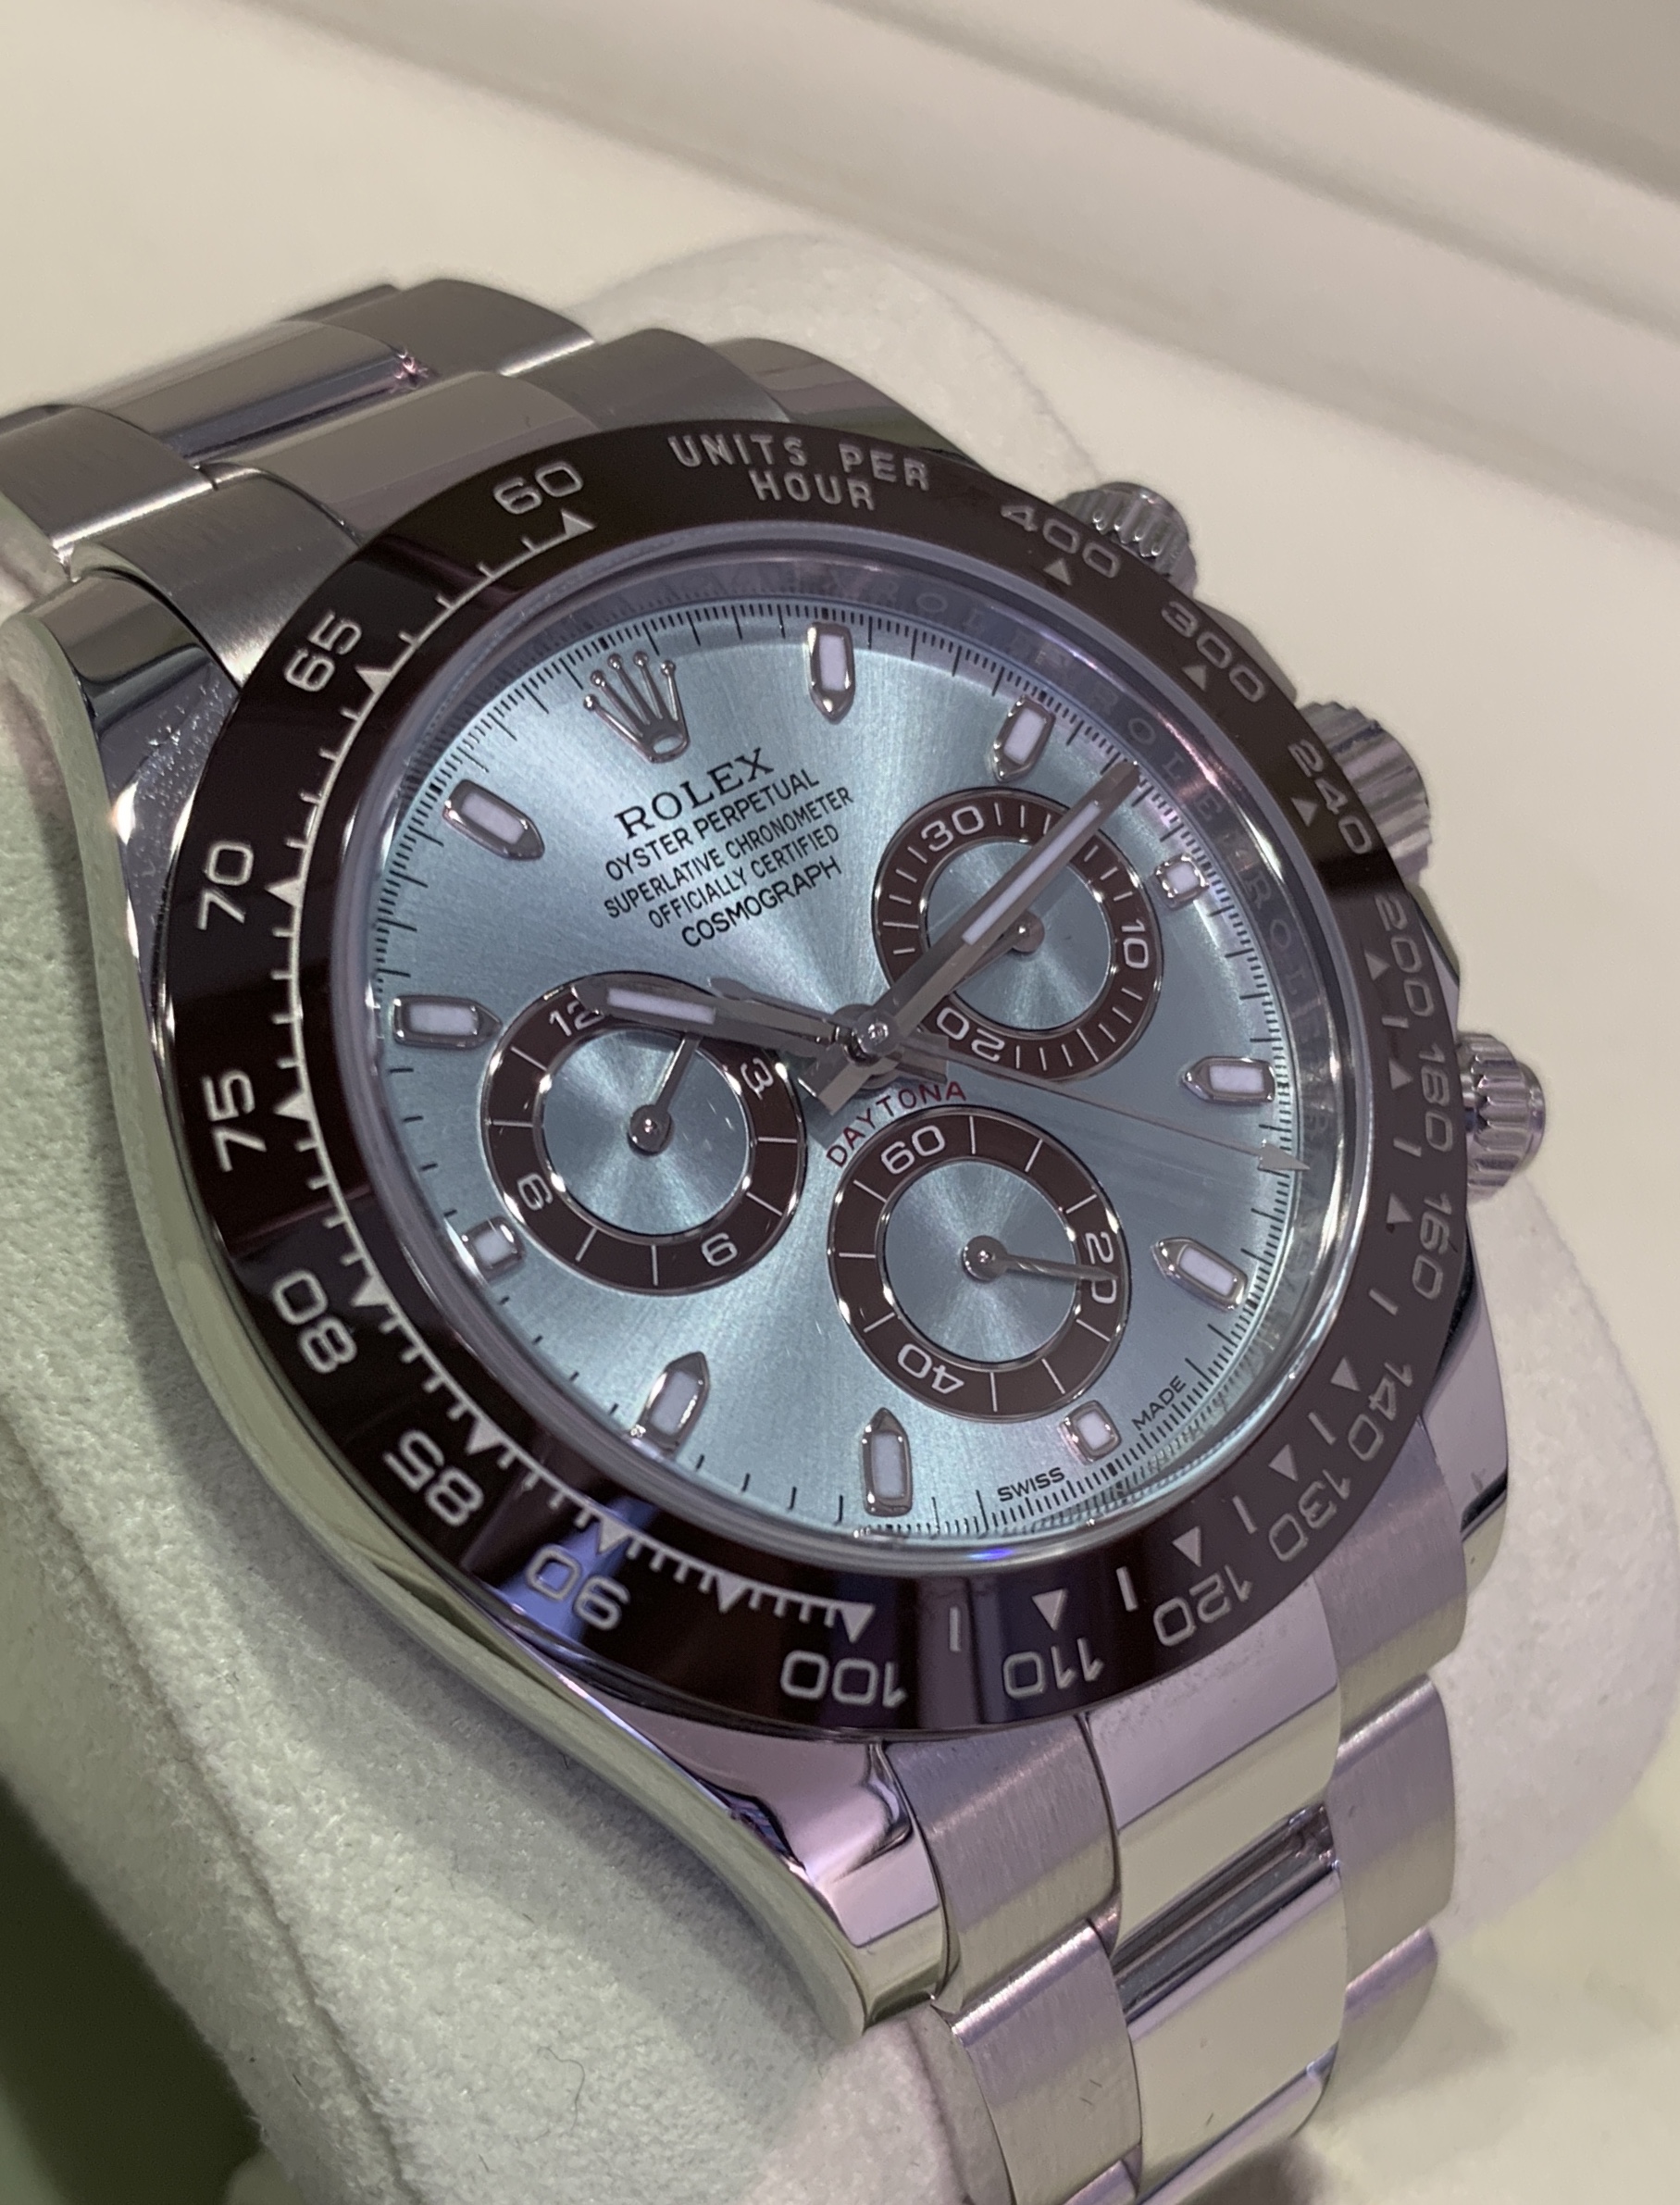 Rolex Daytona in with the ice blue dial 116506 - Watches